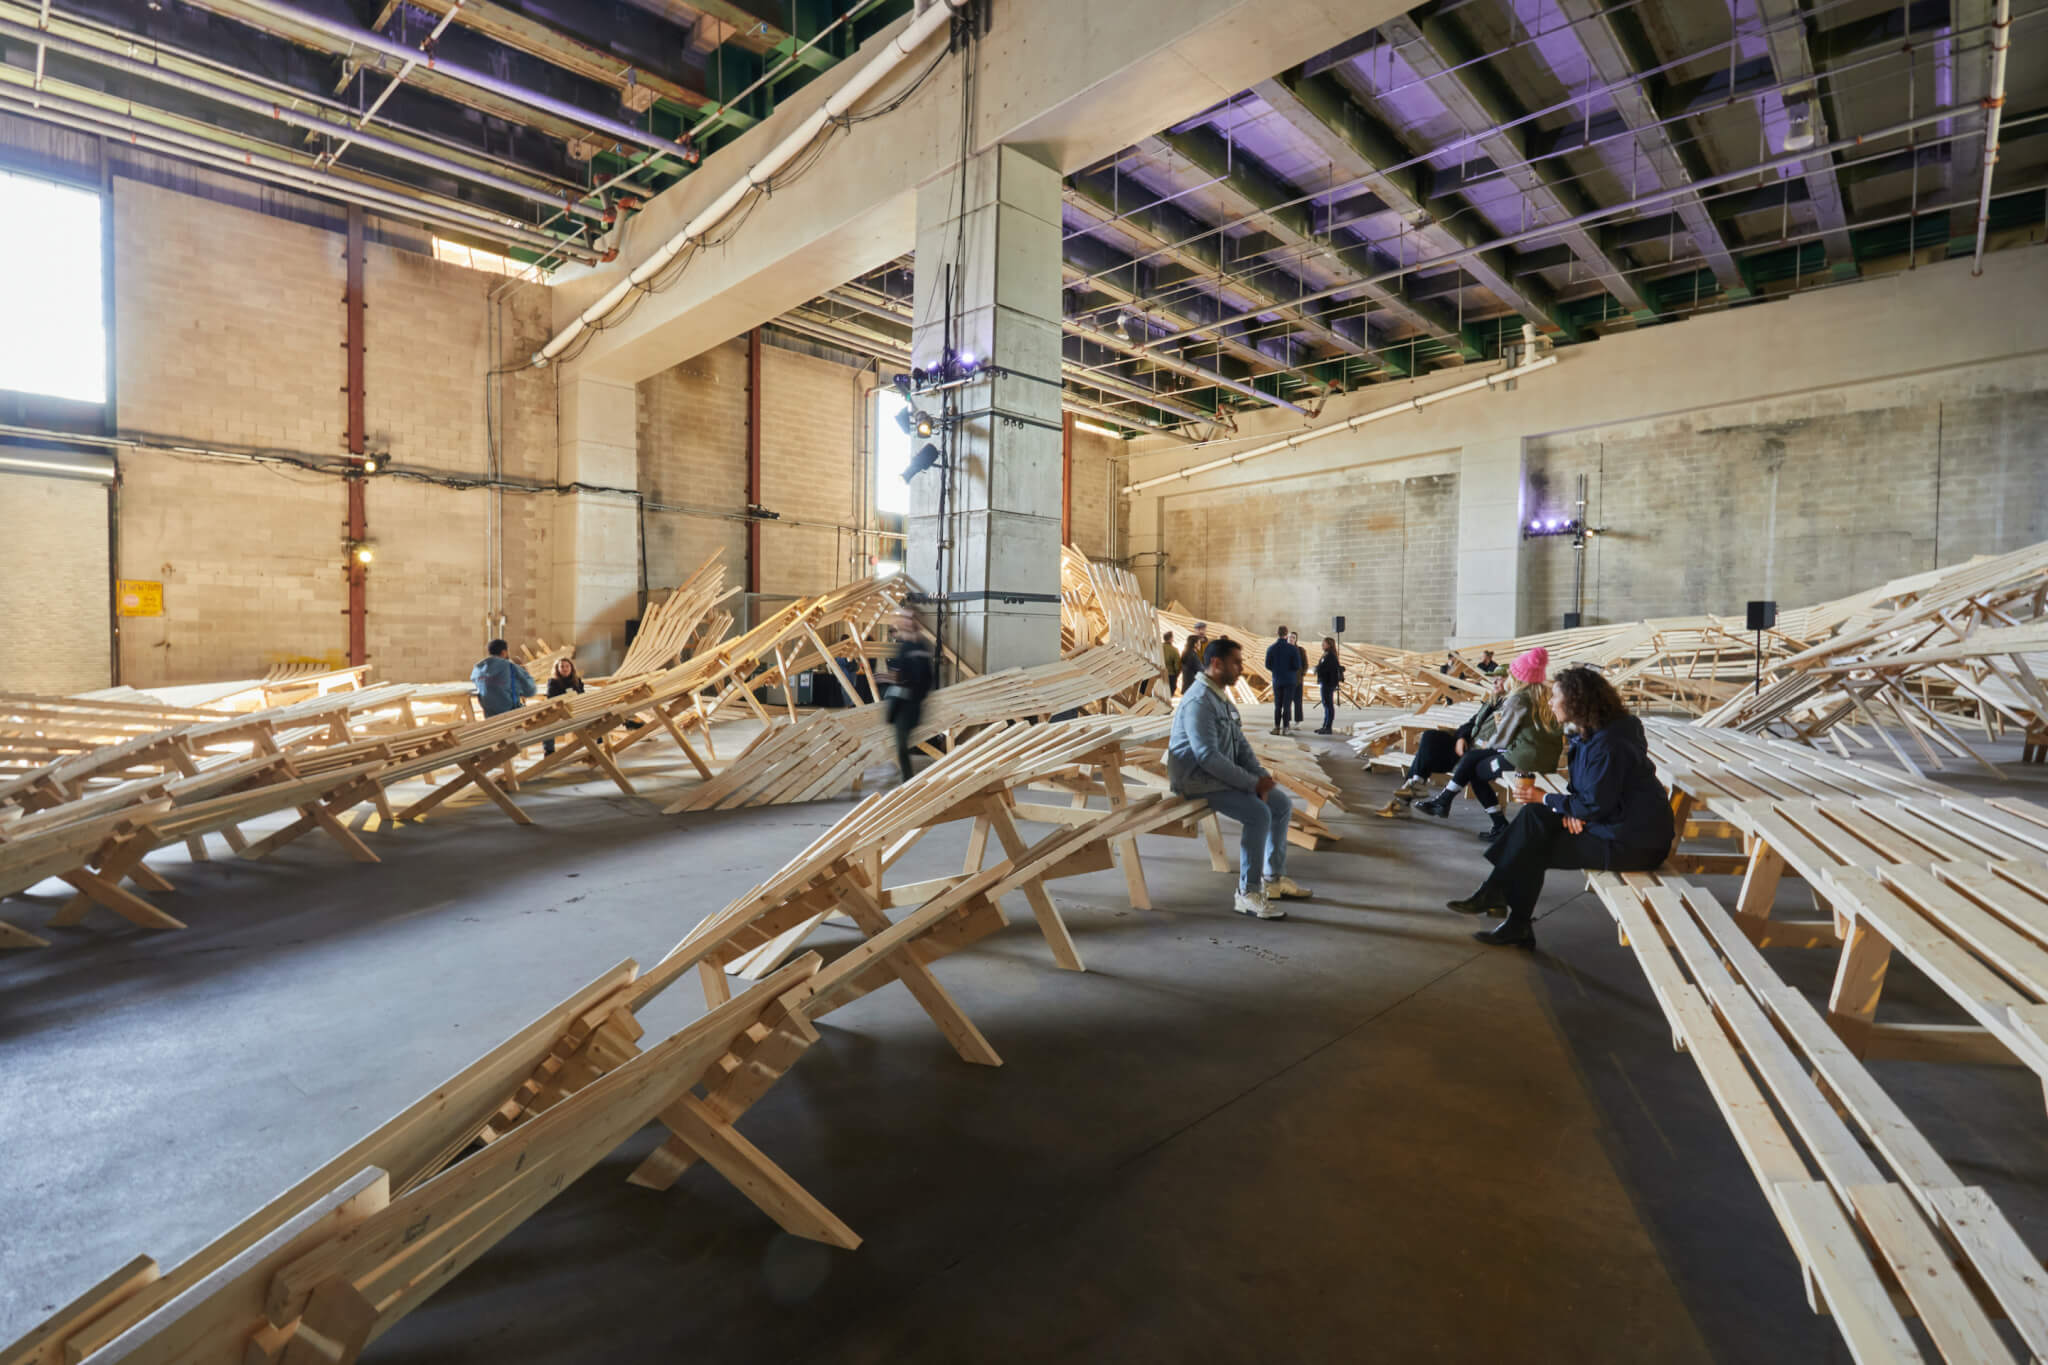 people sit on undulating wooden forms in a large open storage room